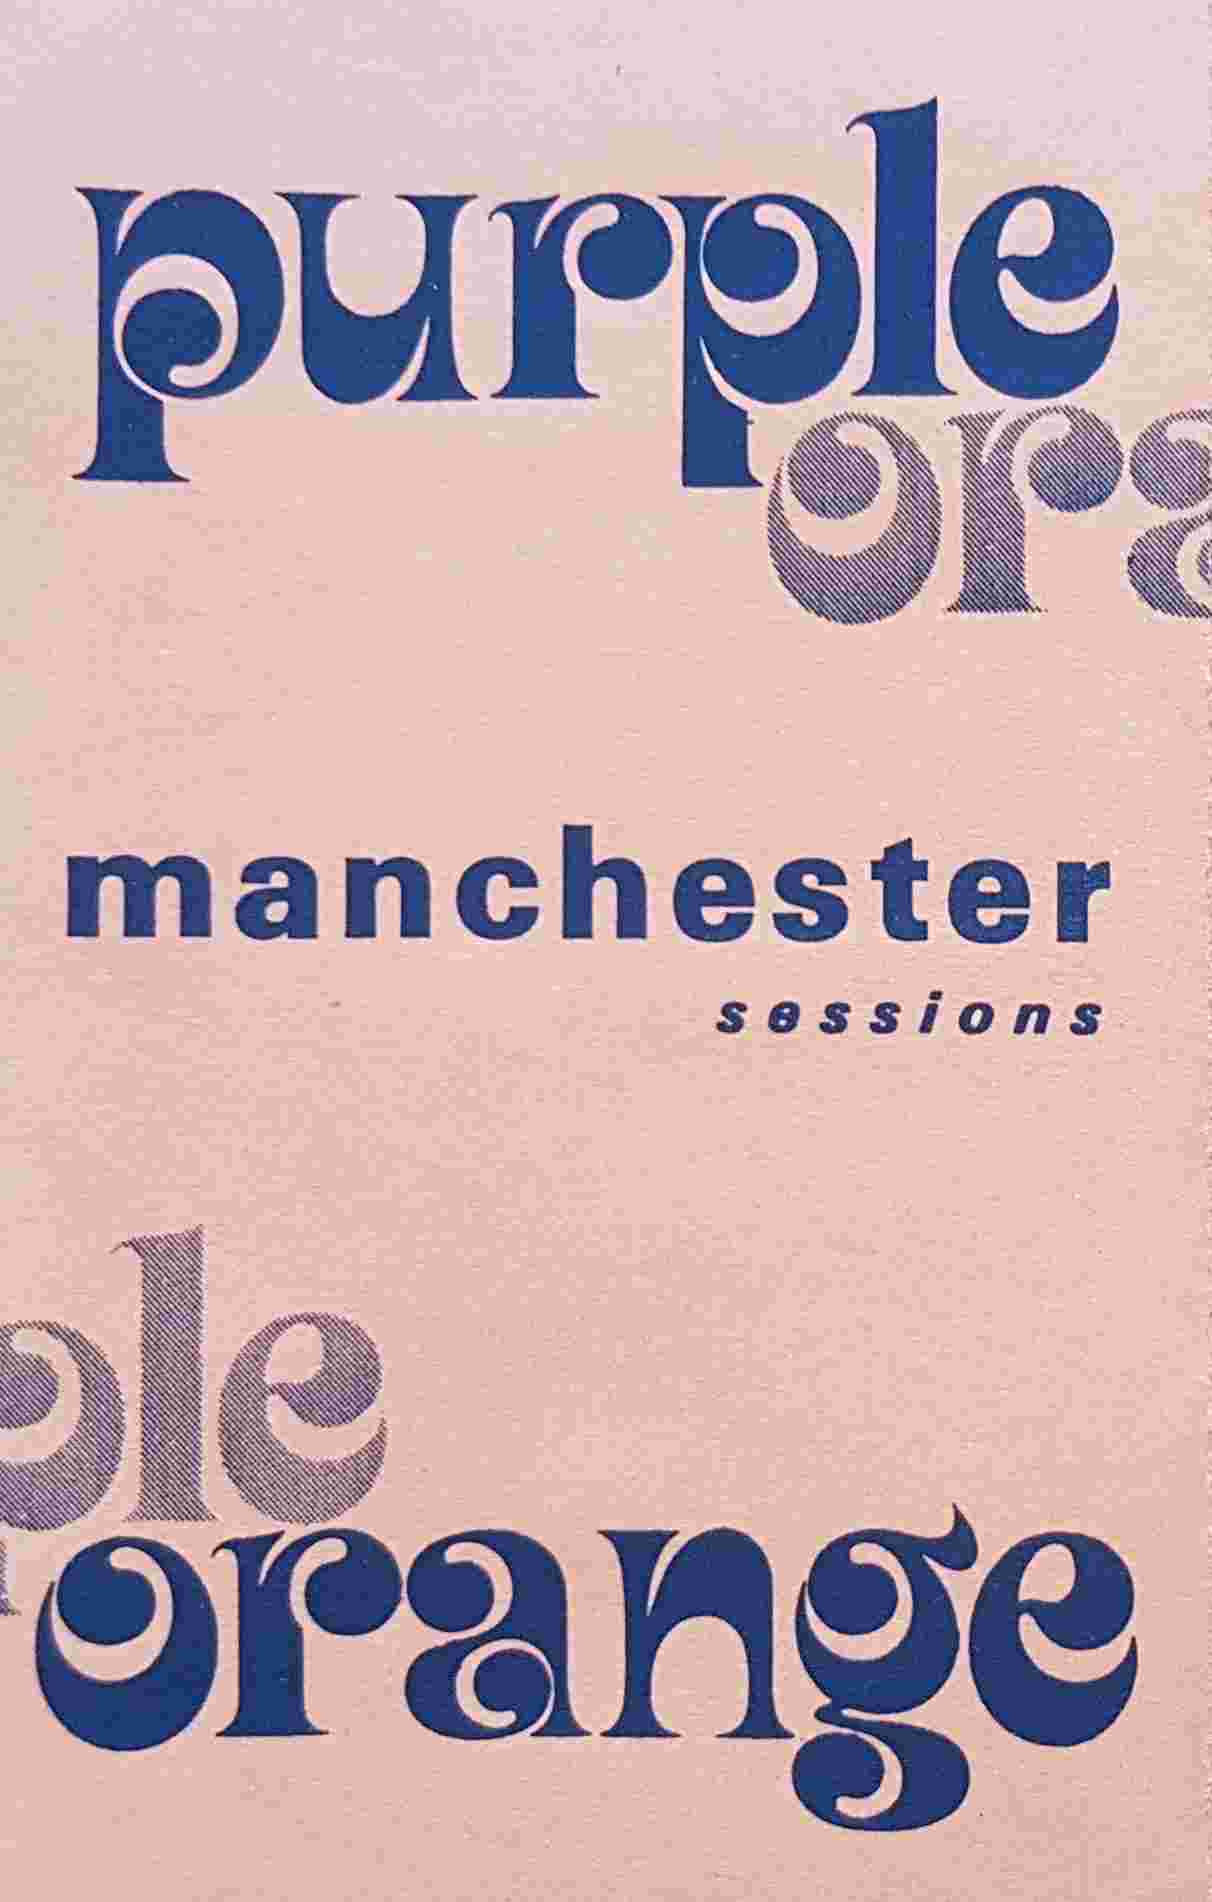 Picture of cassingles-TMS The Manchester sessions by artist Purple Orange